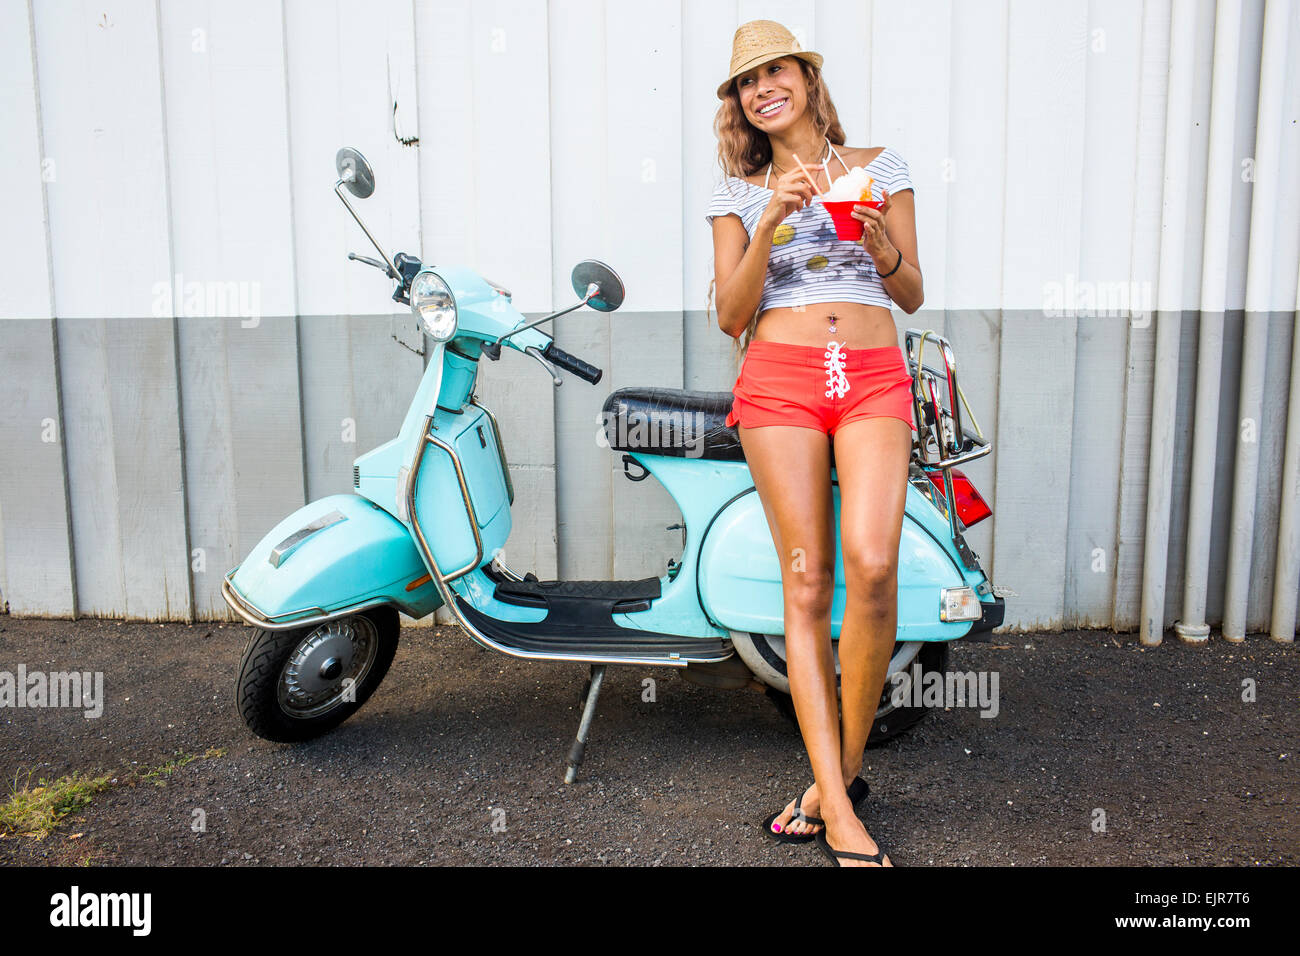 Woman eating shave ice near scooter Stock Photo